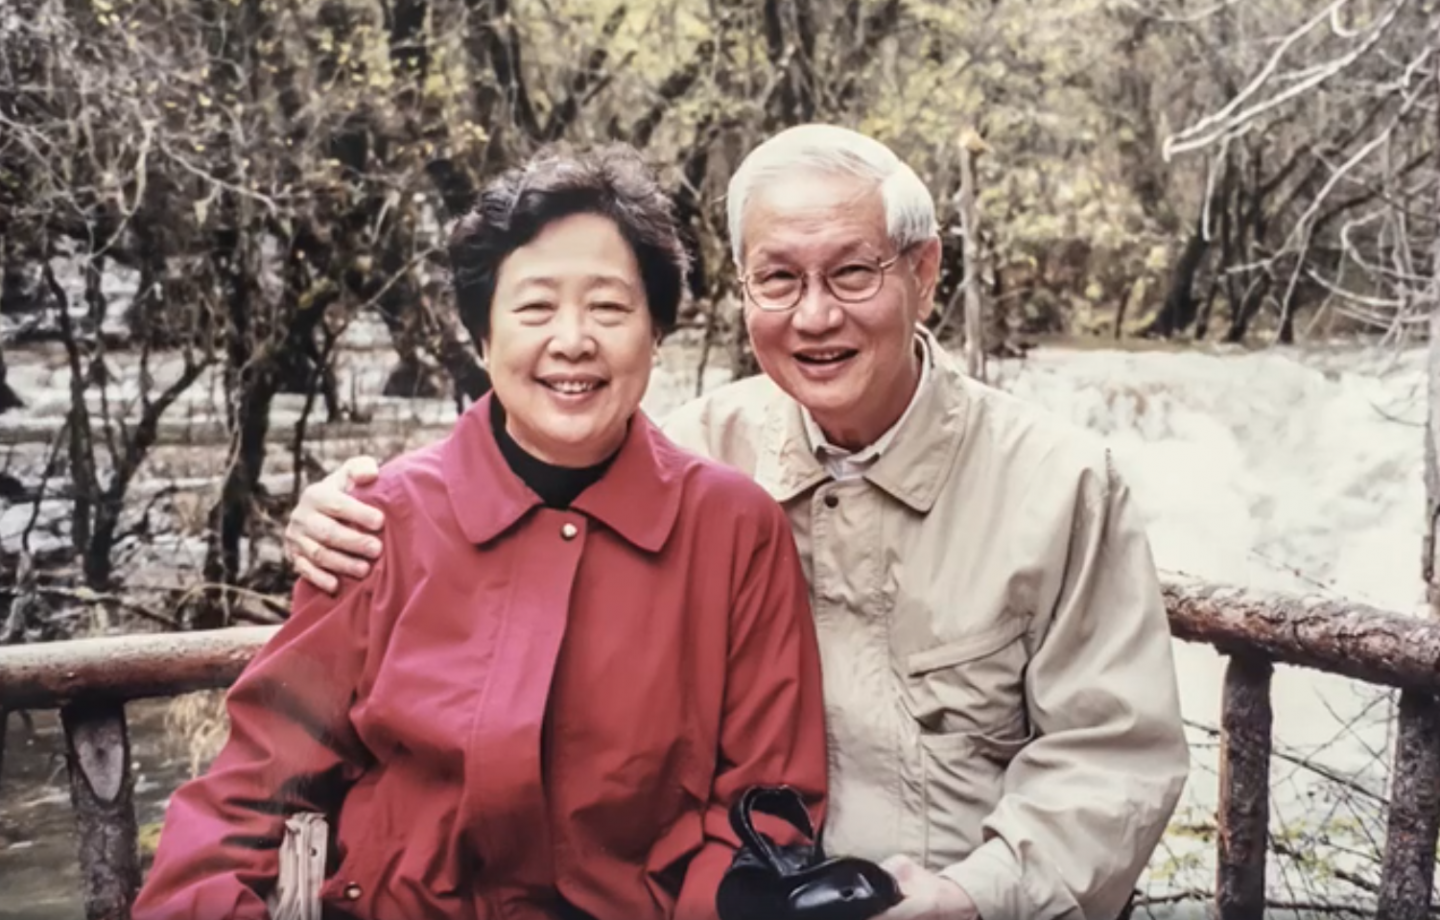 Dr Sng’s wife, Dr Ivy Sng-Peck, was his faithful partner in ministry and missions since they married in 1964. 